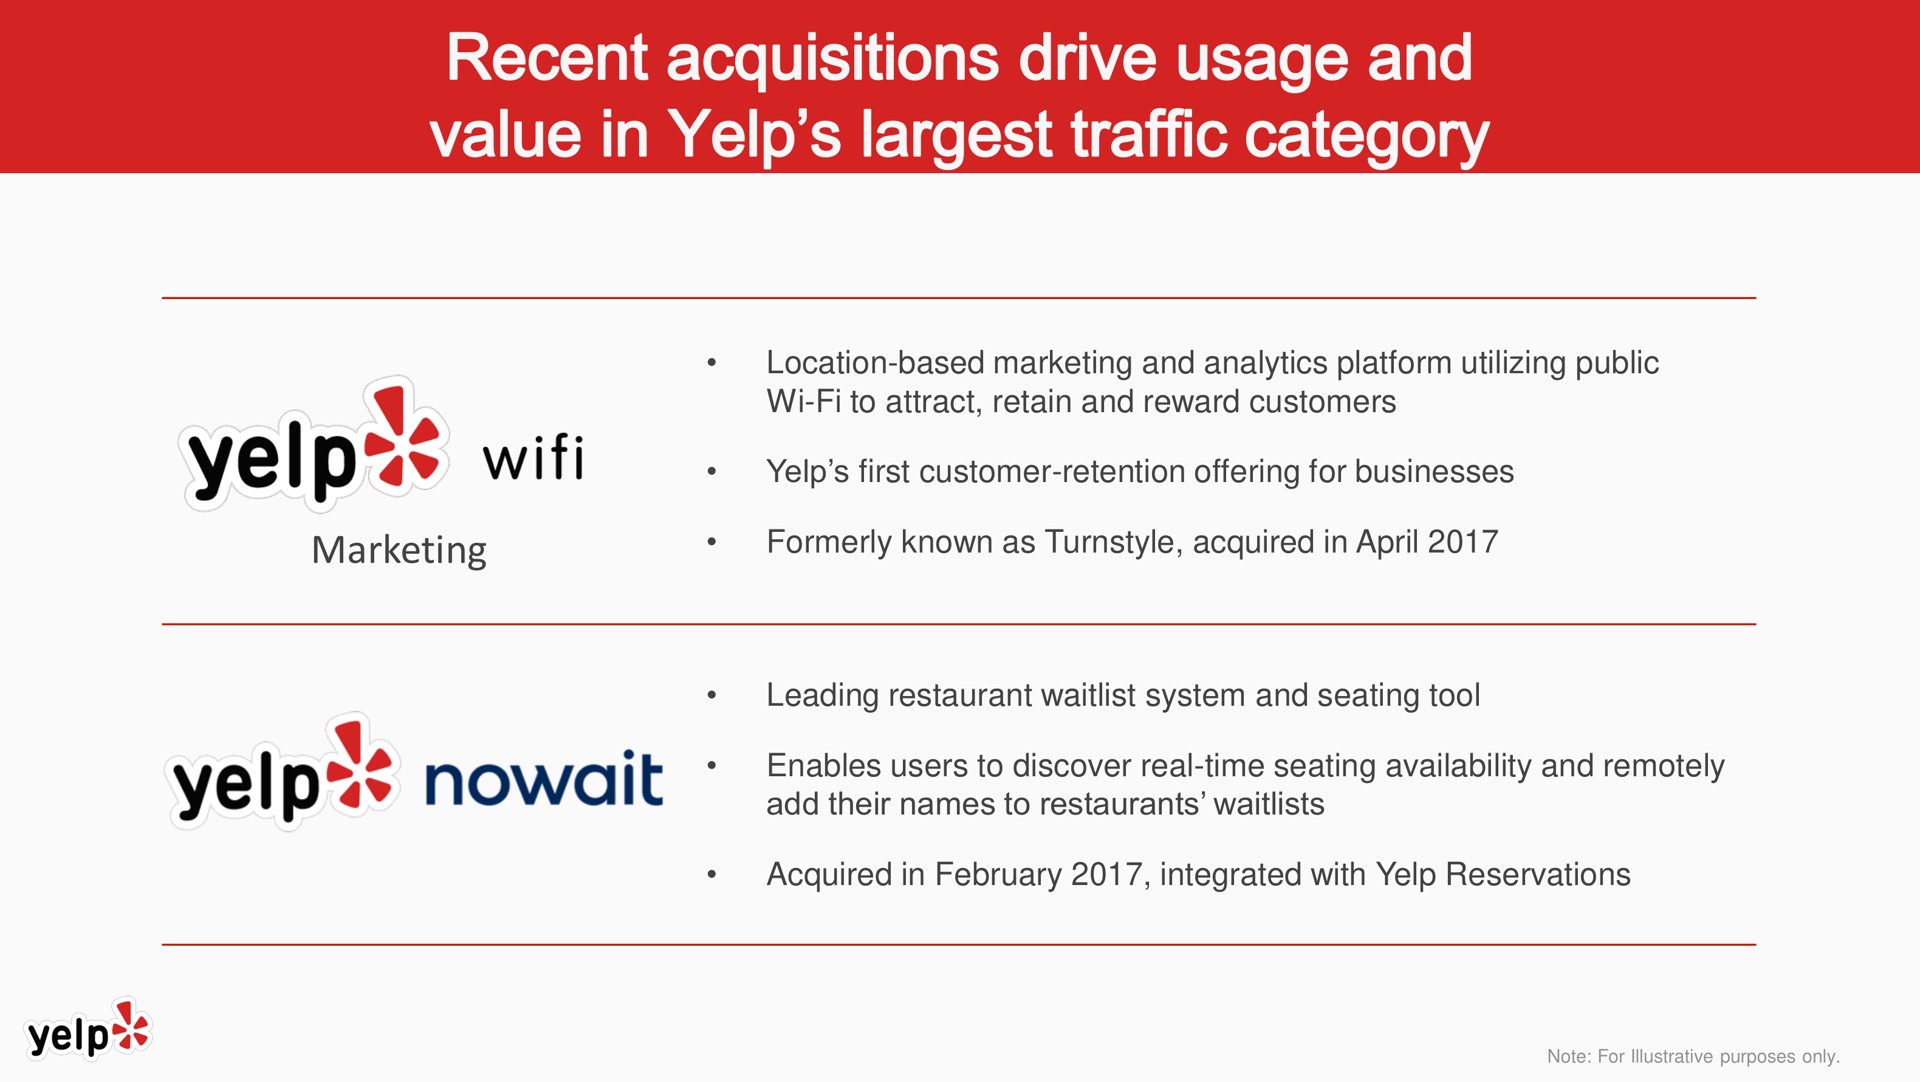 marketing recent acquisitions drive usage and value in yelp traffic category yelp | Yelp